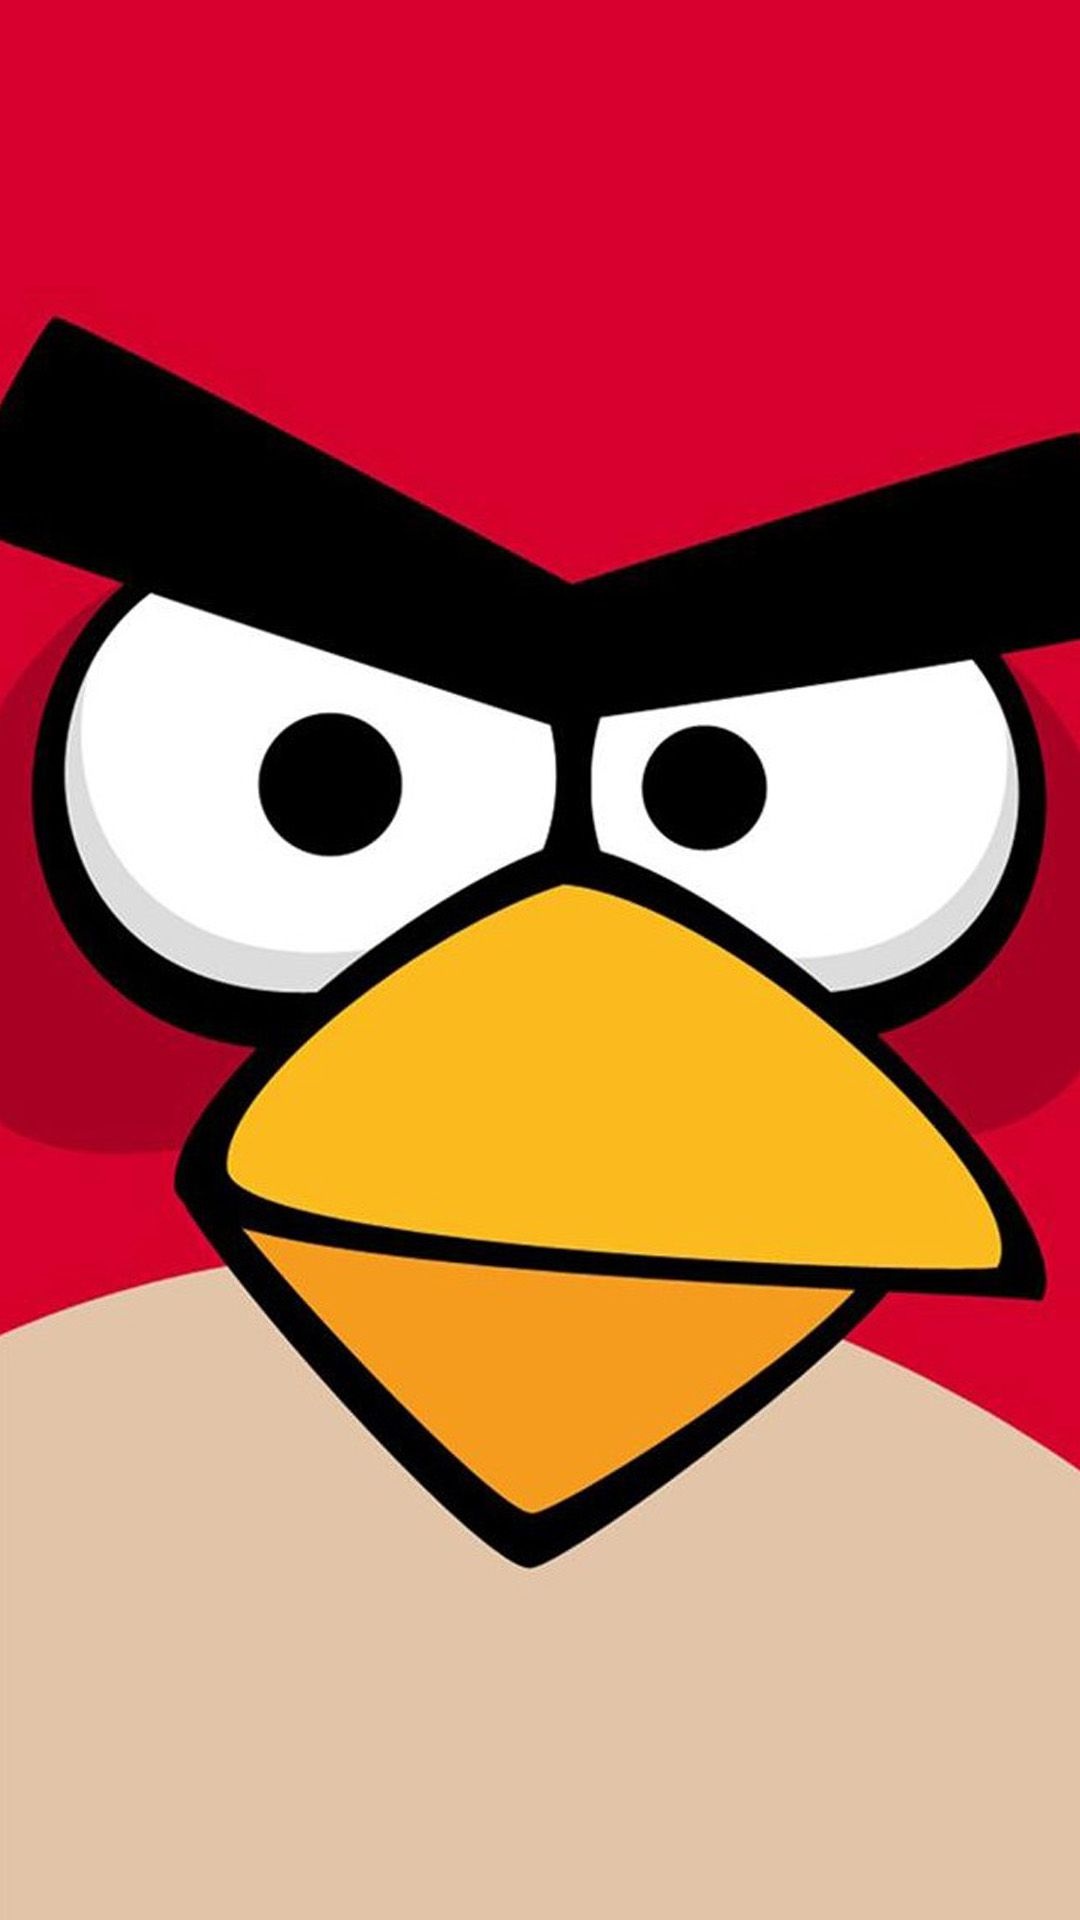 Angry Birds game background, iPhone wallpaper, Stop-motion art, Bird characters, 1080x1920 Full HD Handy